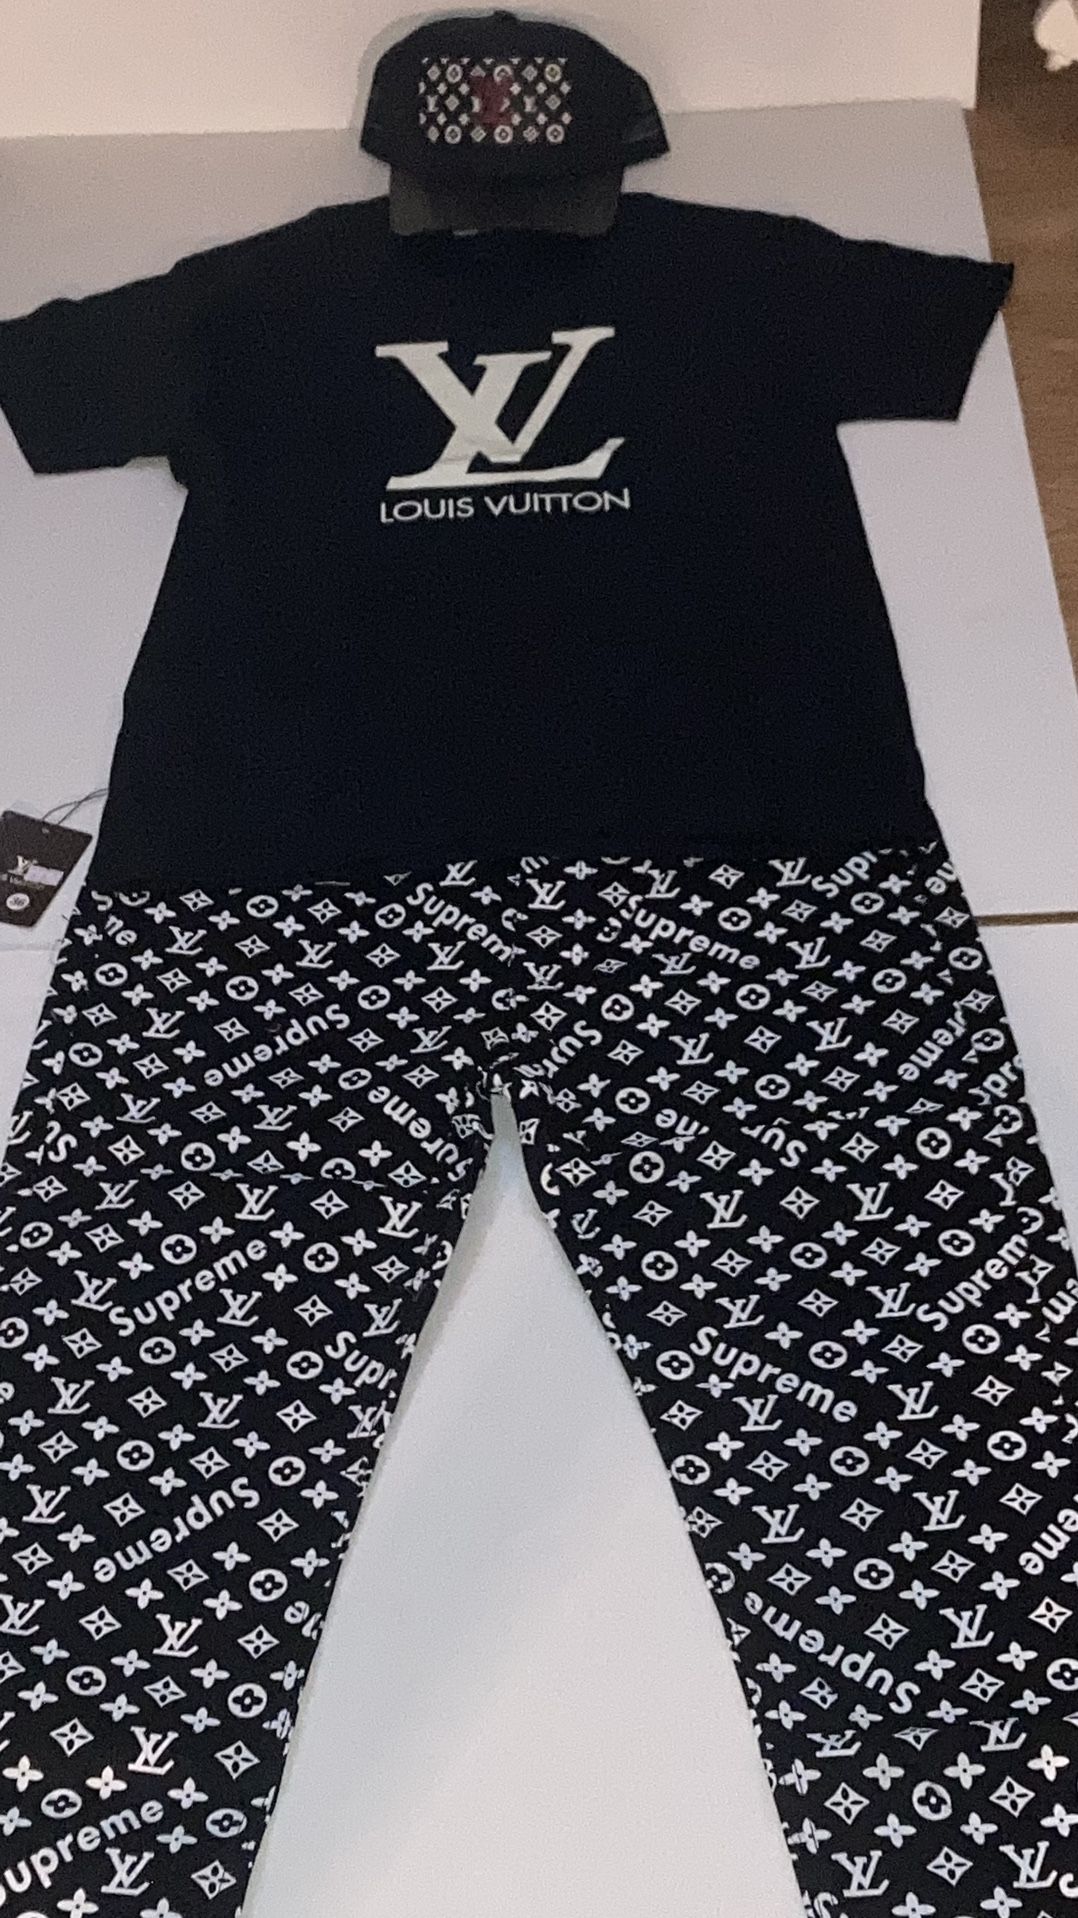 Whole LV Set . Great Price. 